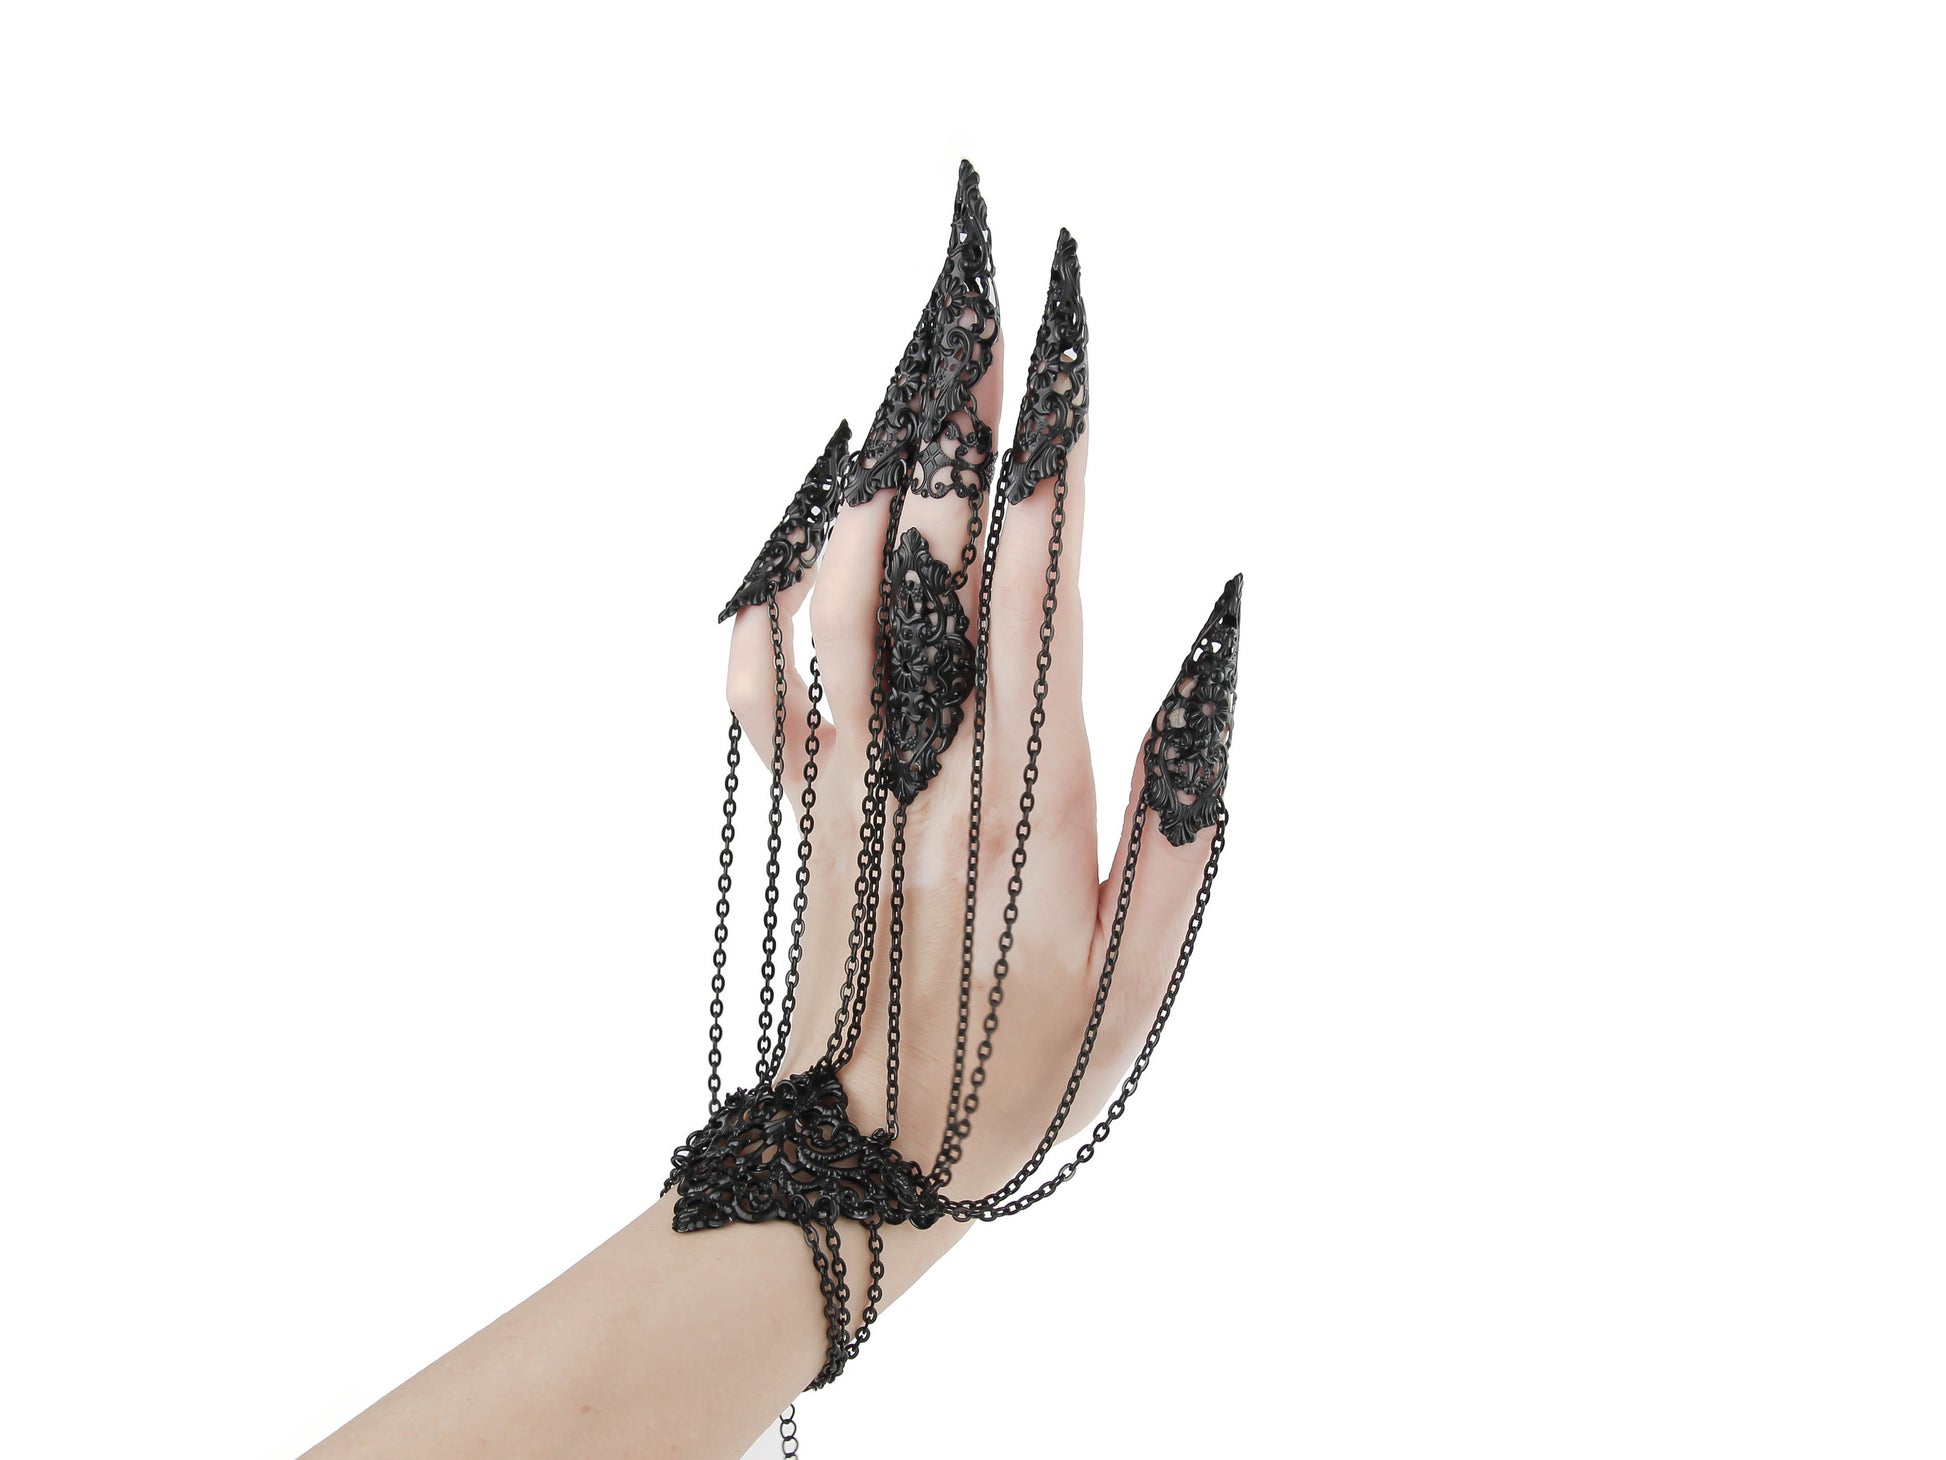 Elevate your style with this Myril Jewels black hand chain bracelet, a vision of neo-goth craftsmanship. Each black chain drapes elegantly from a wrist cuff to filigree claw rings, perfect for gothic-chic fashion lovers and a standout choice for bold everyday wear.